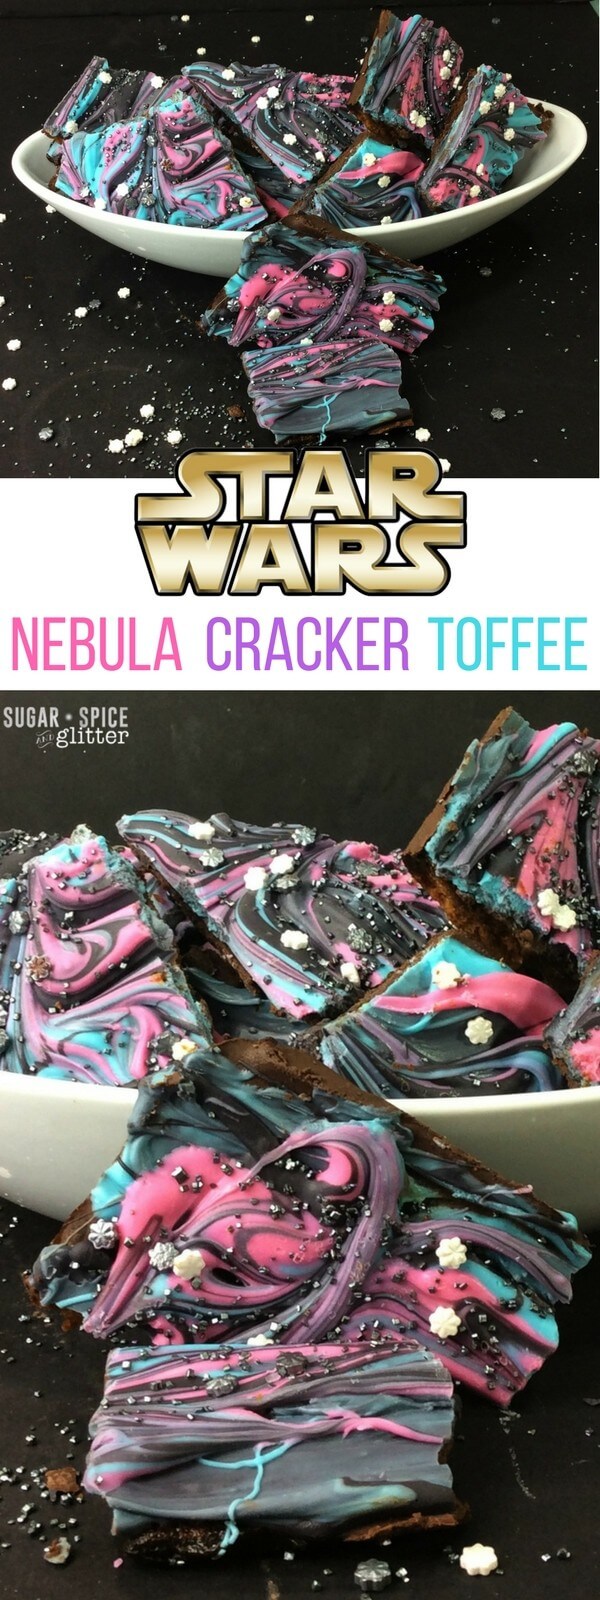 This delicious salty-sweet treat is perfect for a Star Wars party or family movie night, a fun take on the galaxy desserts sweeping the internet